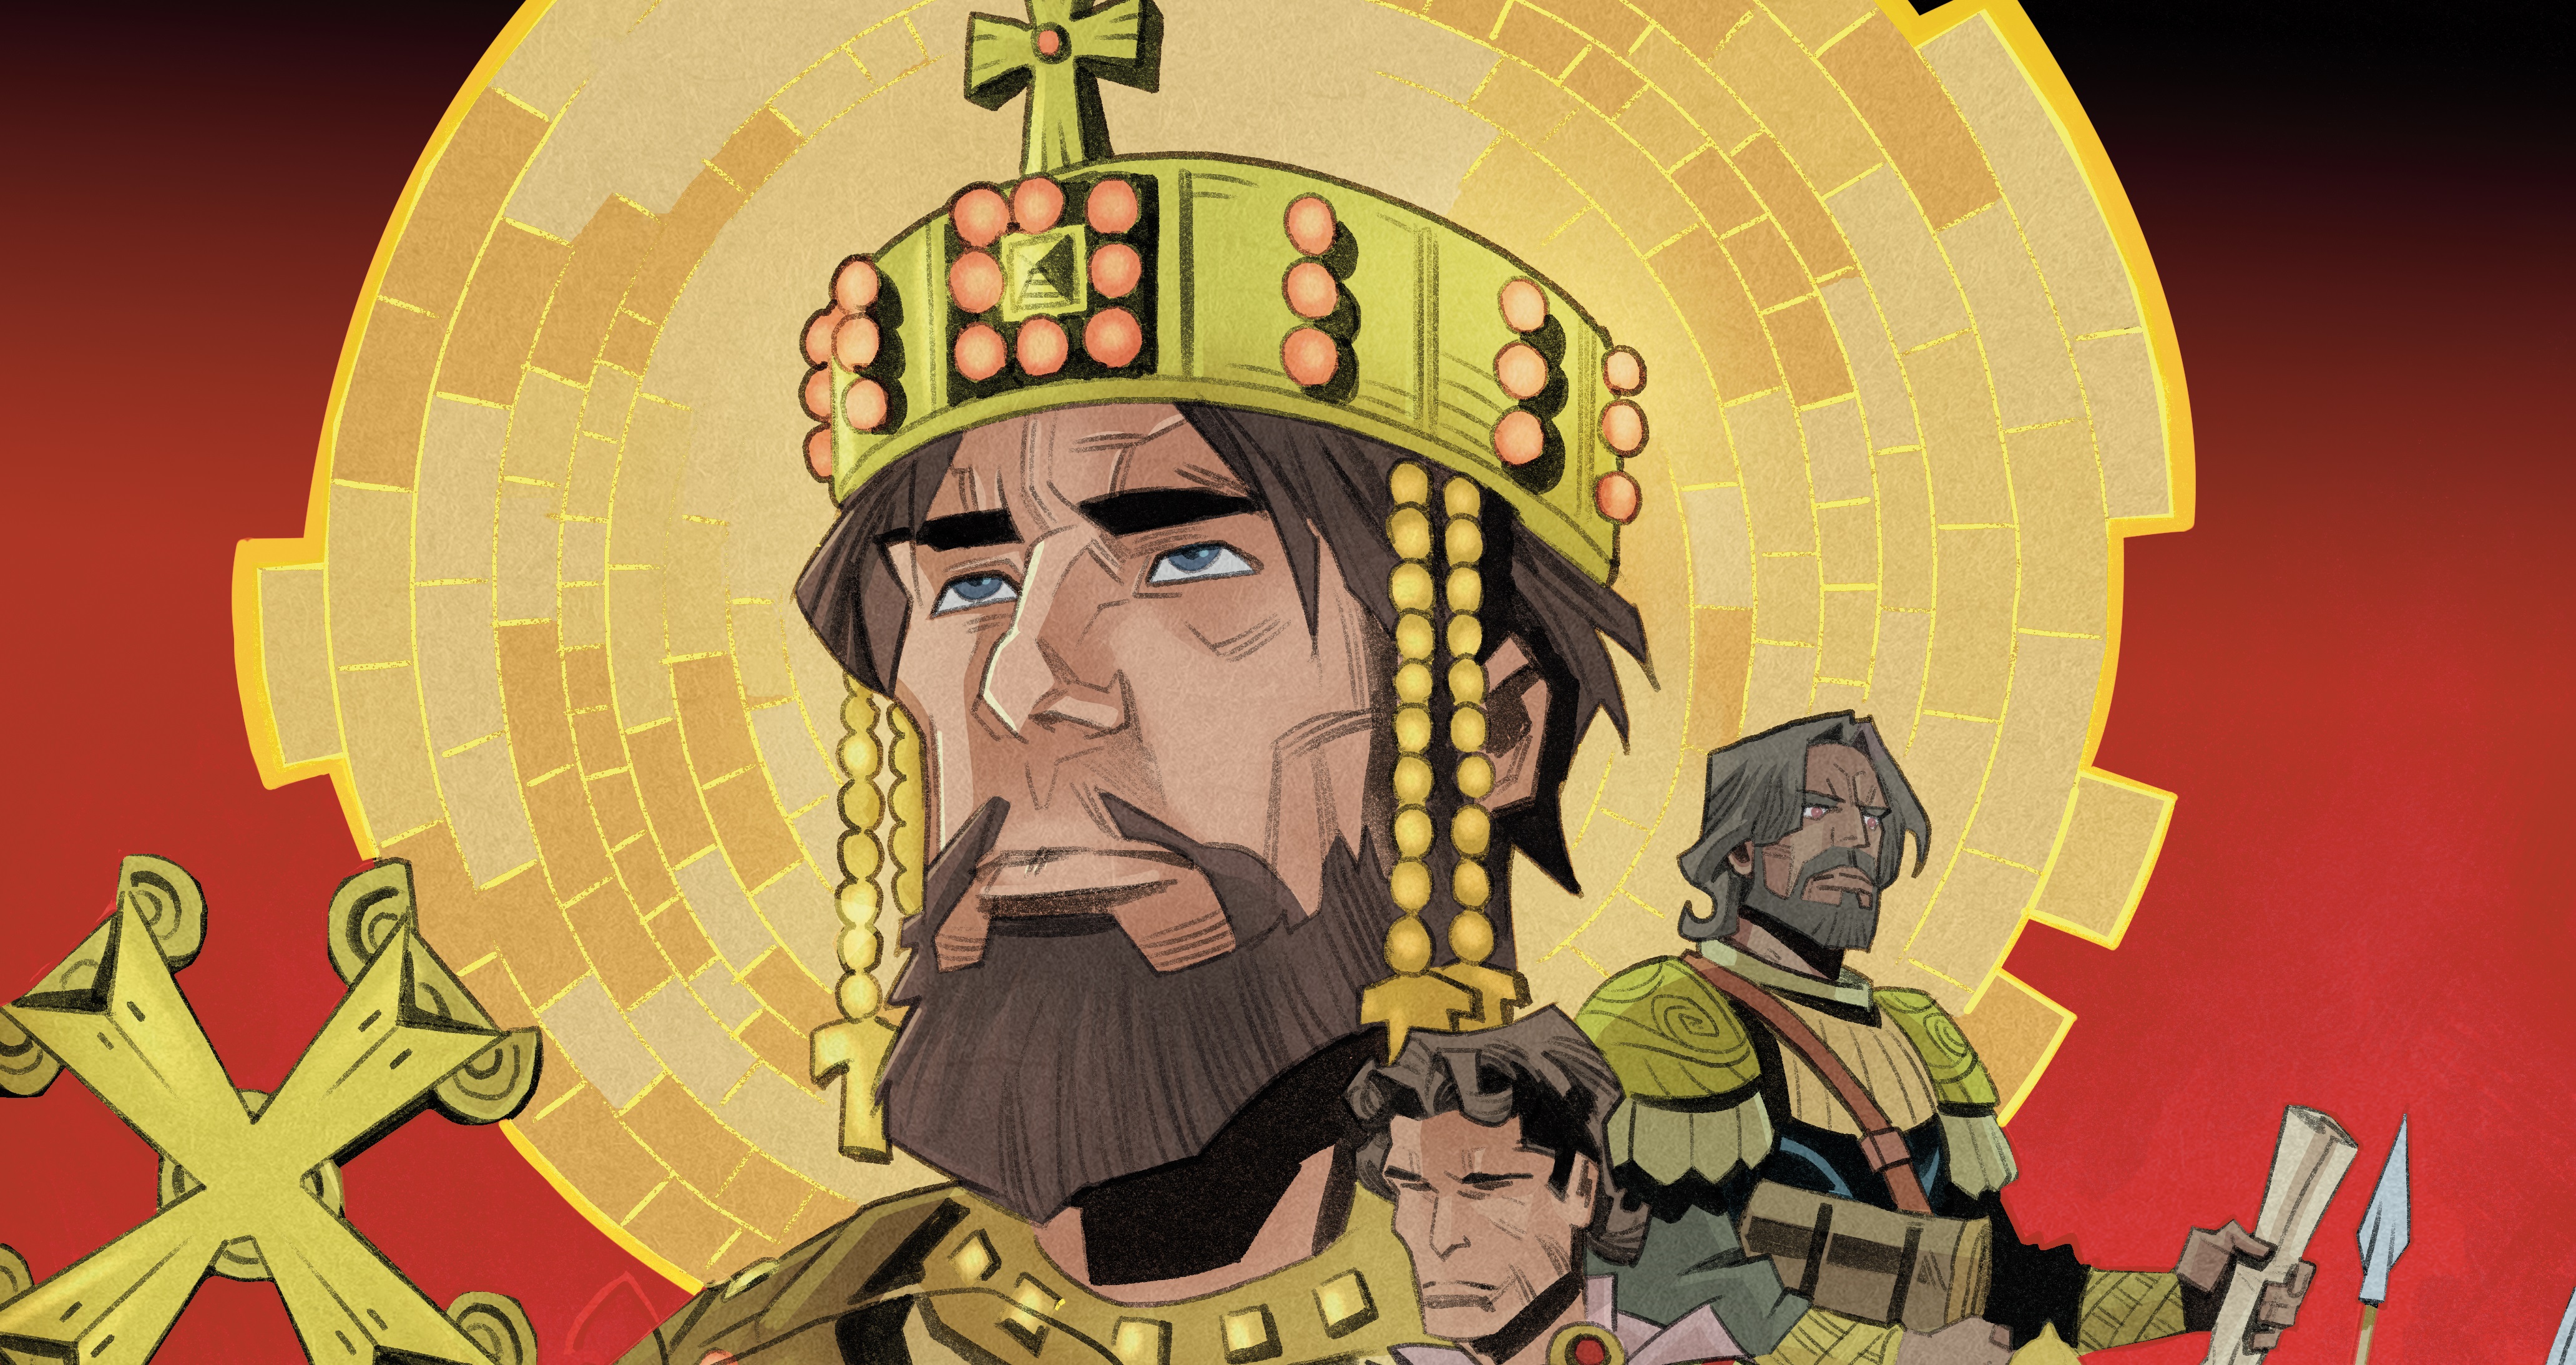  Crusader Kings 3 is, unexpectedly, the latest videogame to receive an official comic book 